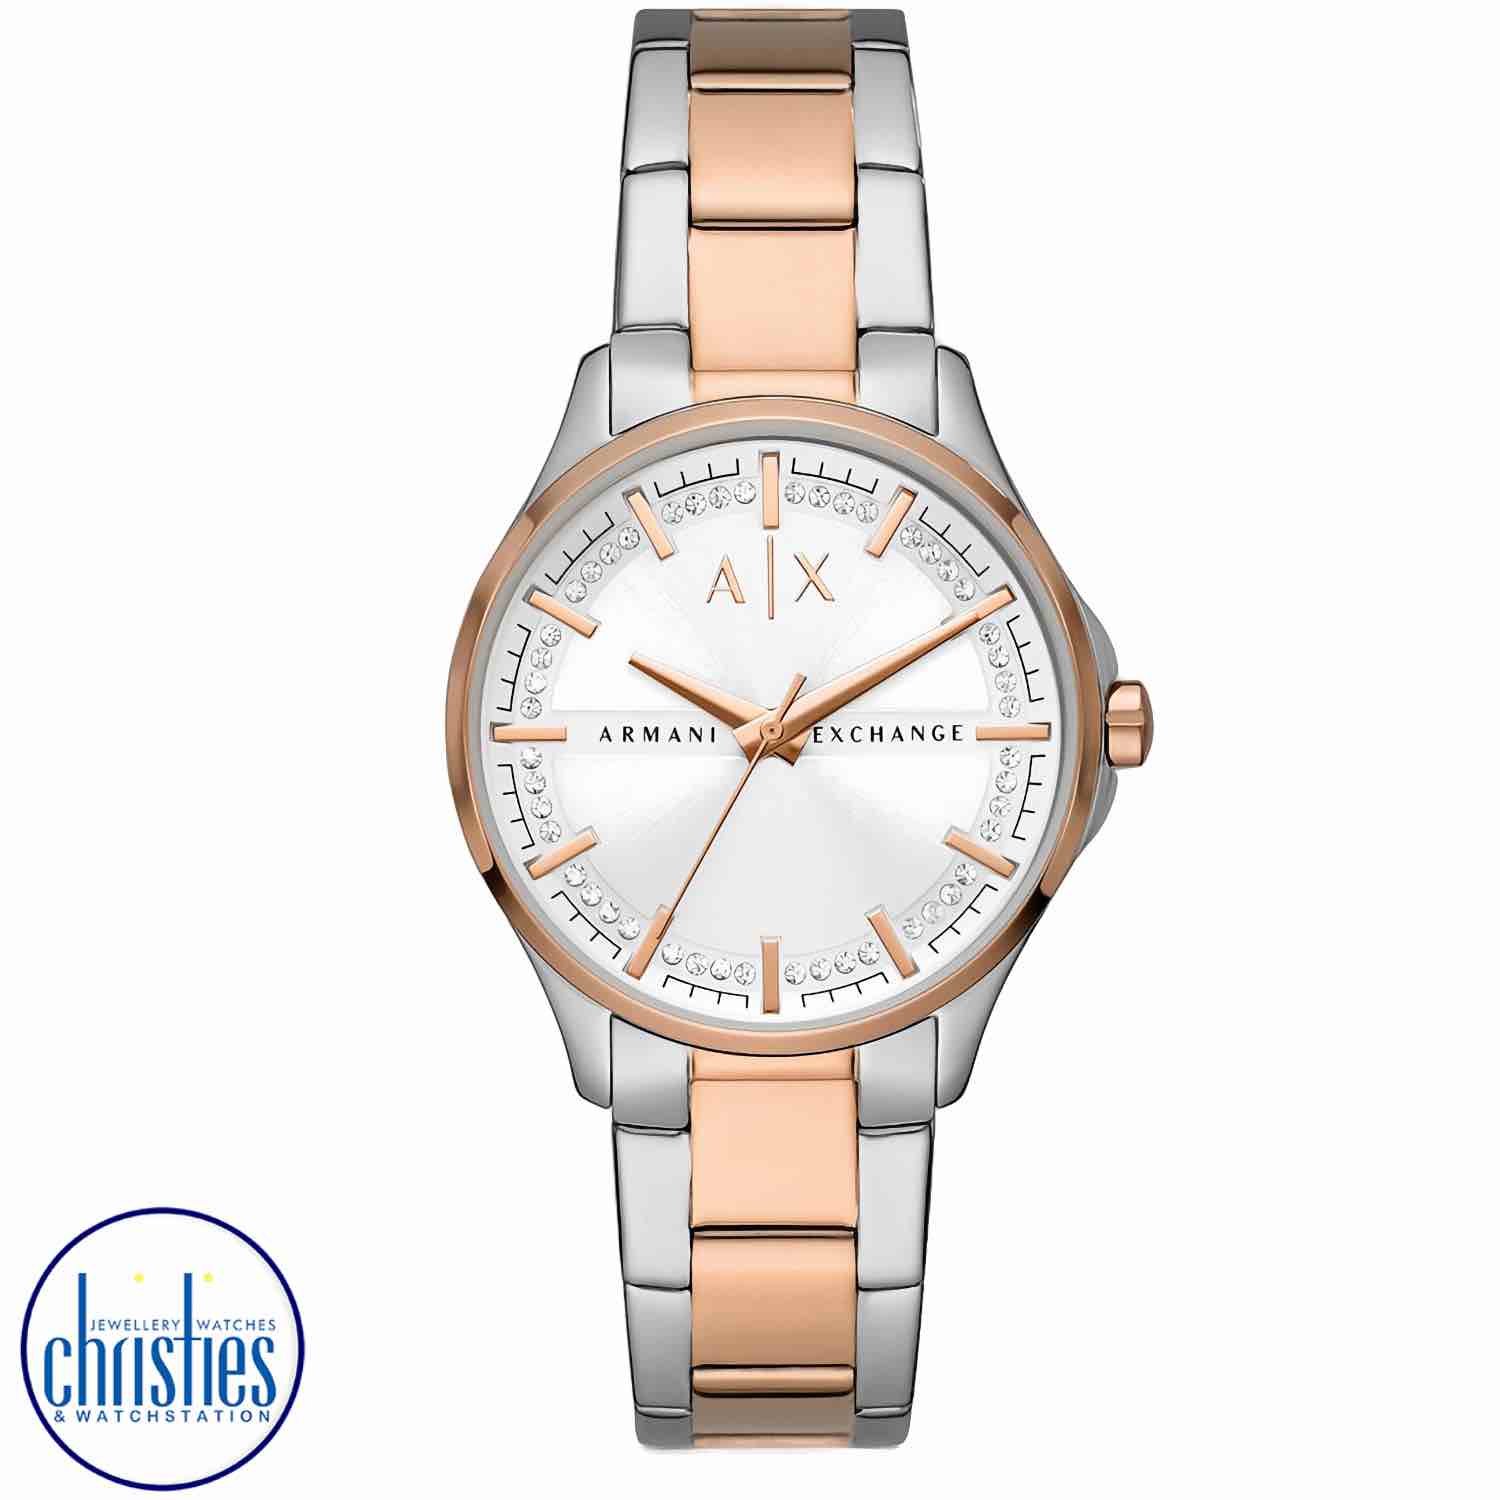 AX5258 A|X Armani Exchange Three-Hand Two-Tone Stainless Steel Watch. AX5258 A|X Armani Exchange Three-Hand Two-Tone Stainless Steel WatchAfterpay - Split your purchase into 4 instalments - Pay for your purchase over 4 instalments, due every two weeks.